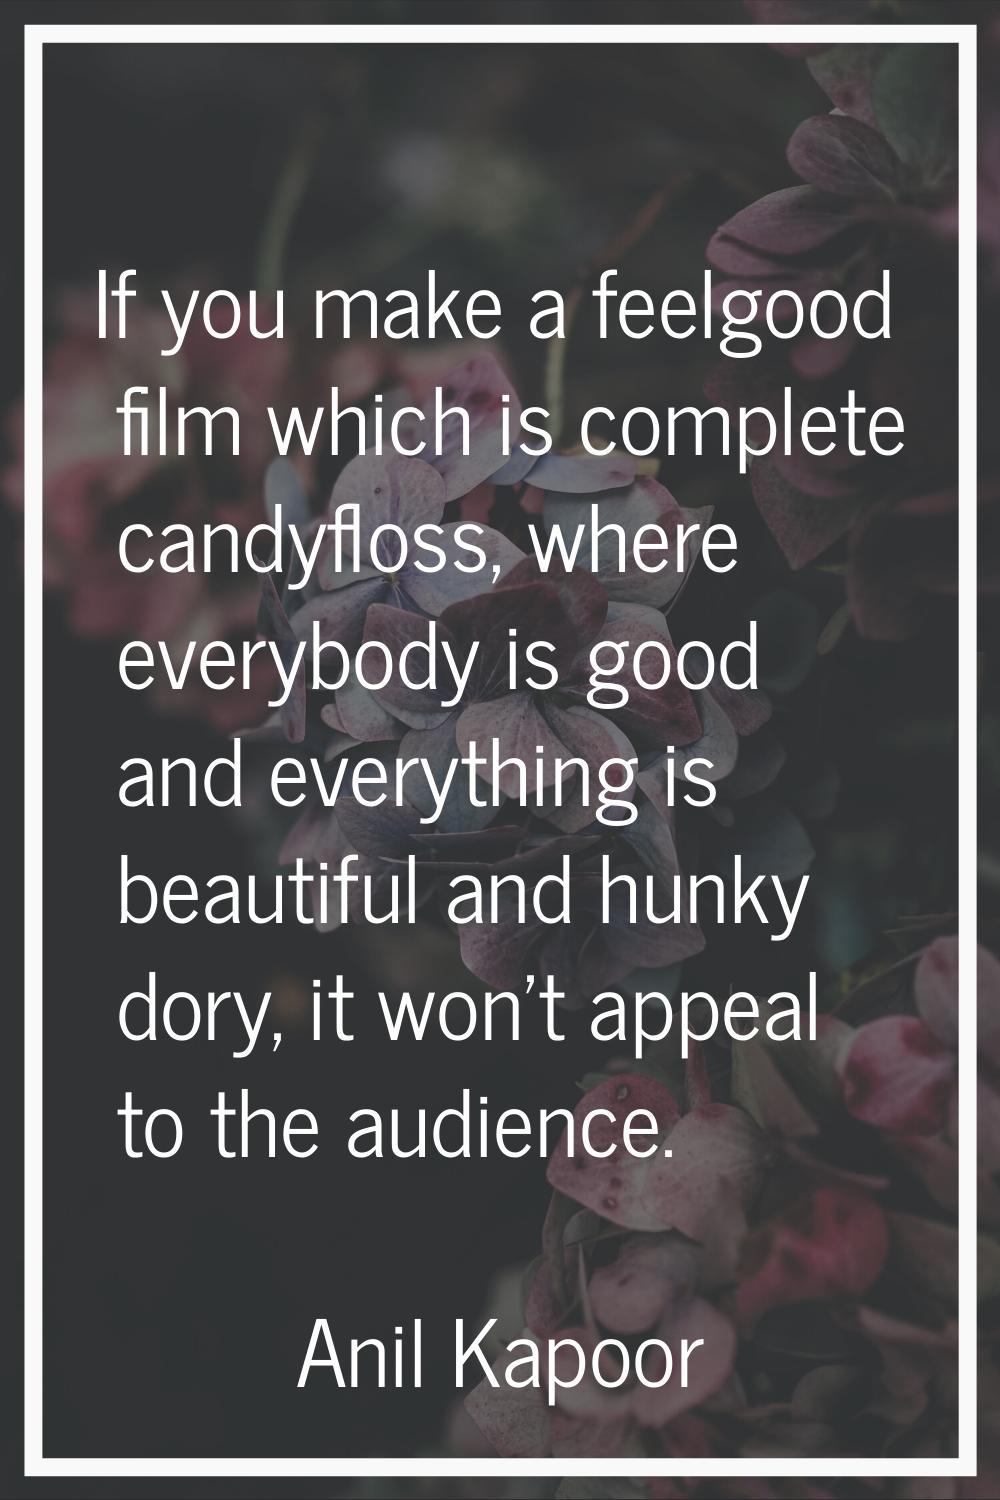 If you make a feelgood film which is complete candyfloss, where everybody is good and everything is